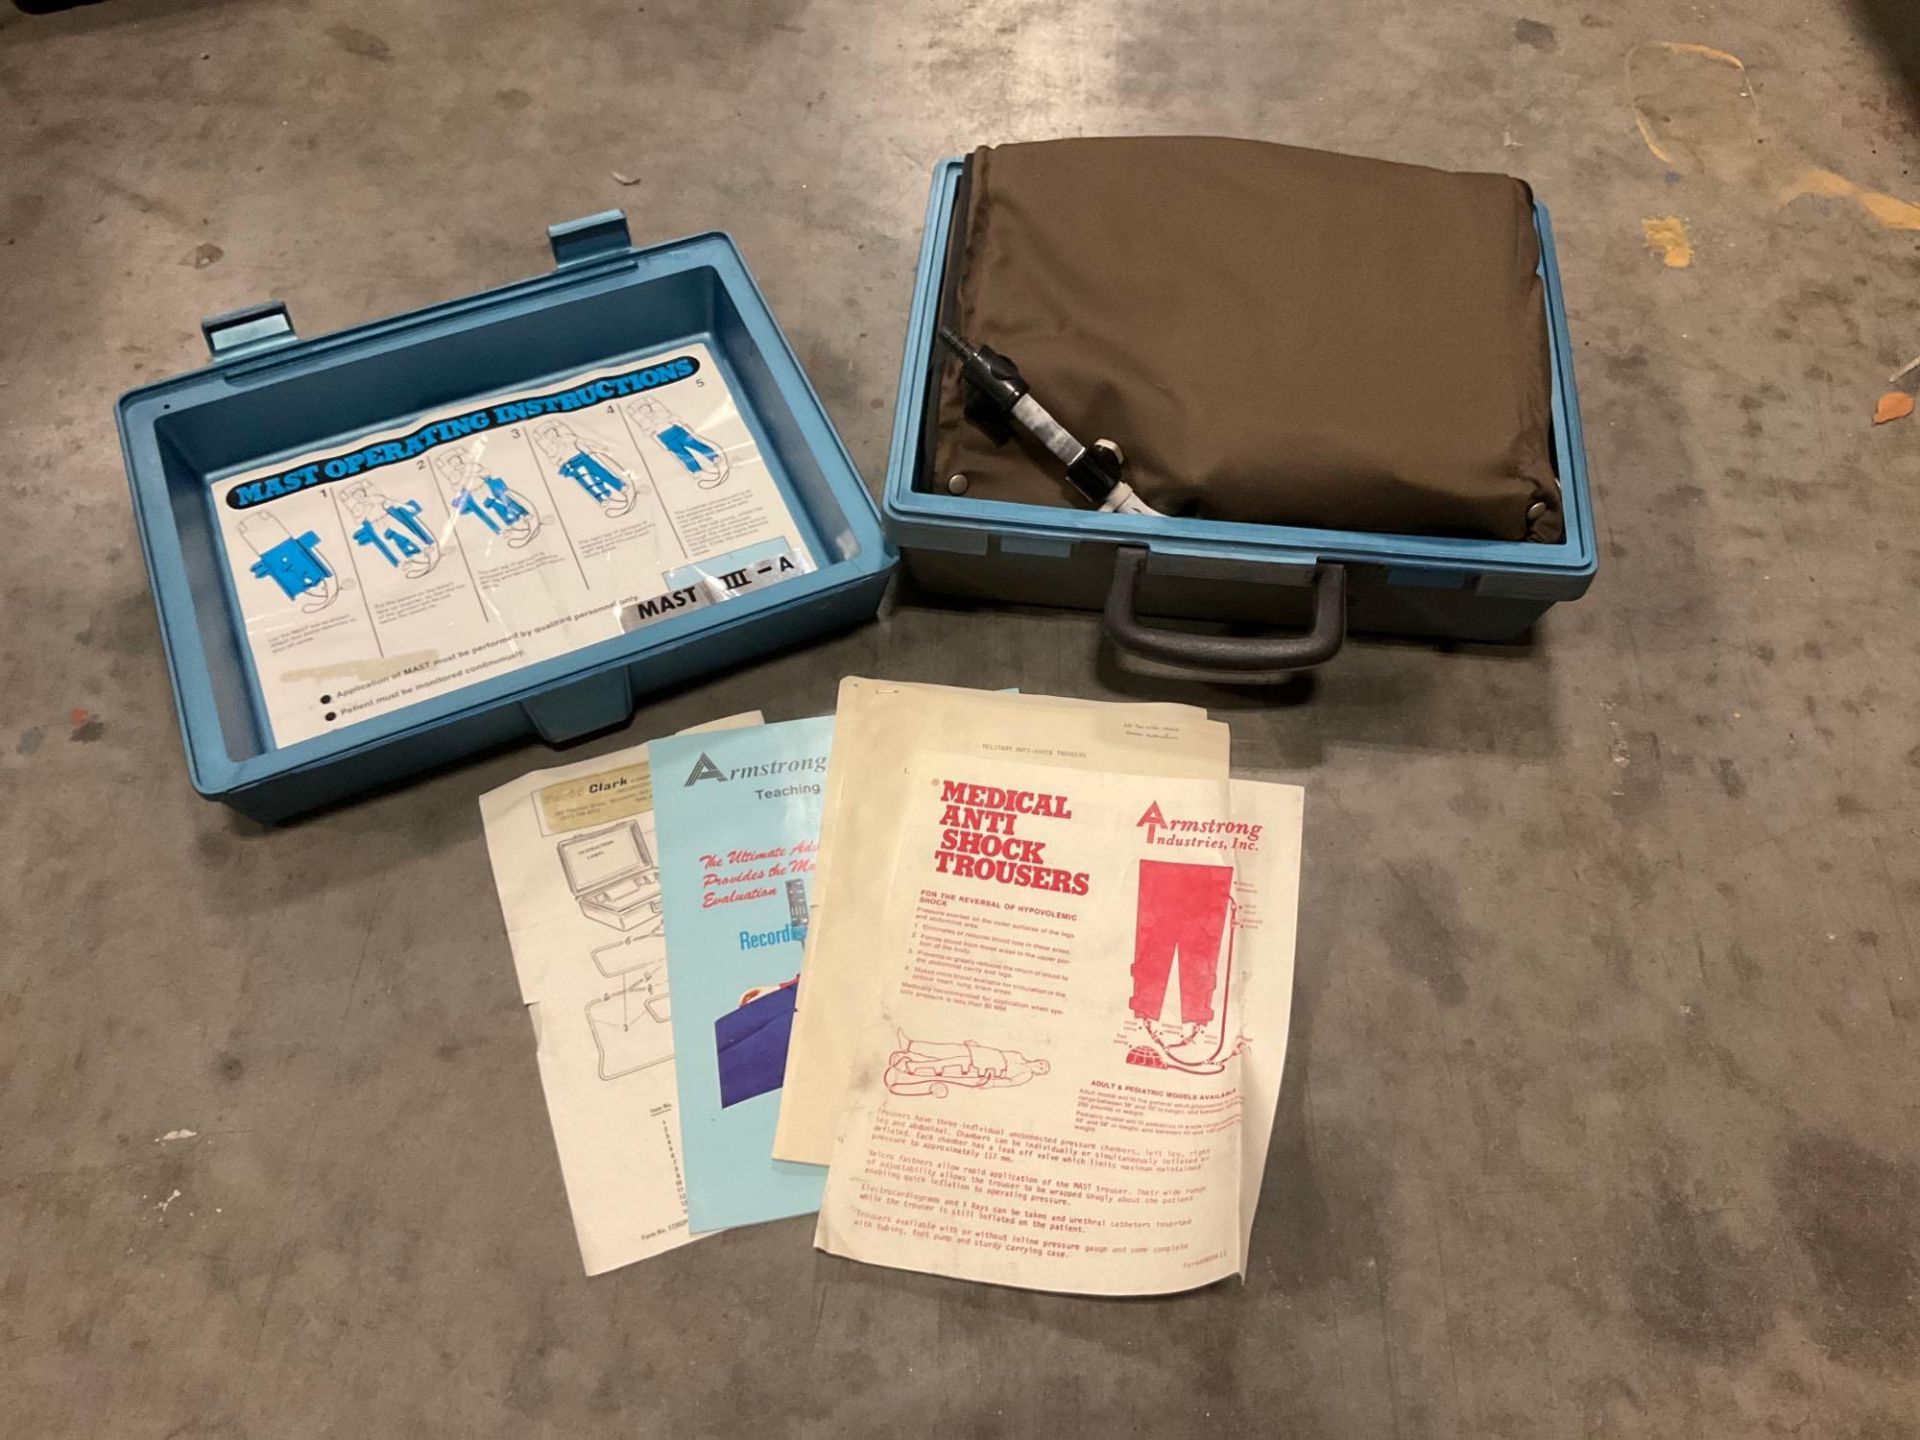 ARMSTRONG INDUSTRIAL MEDICAL ANTI SHOCK TROUSERS MAST III-A IN CARRYING CASE